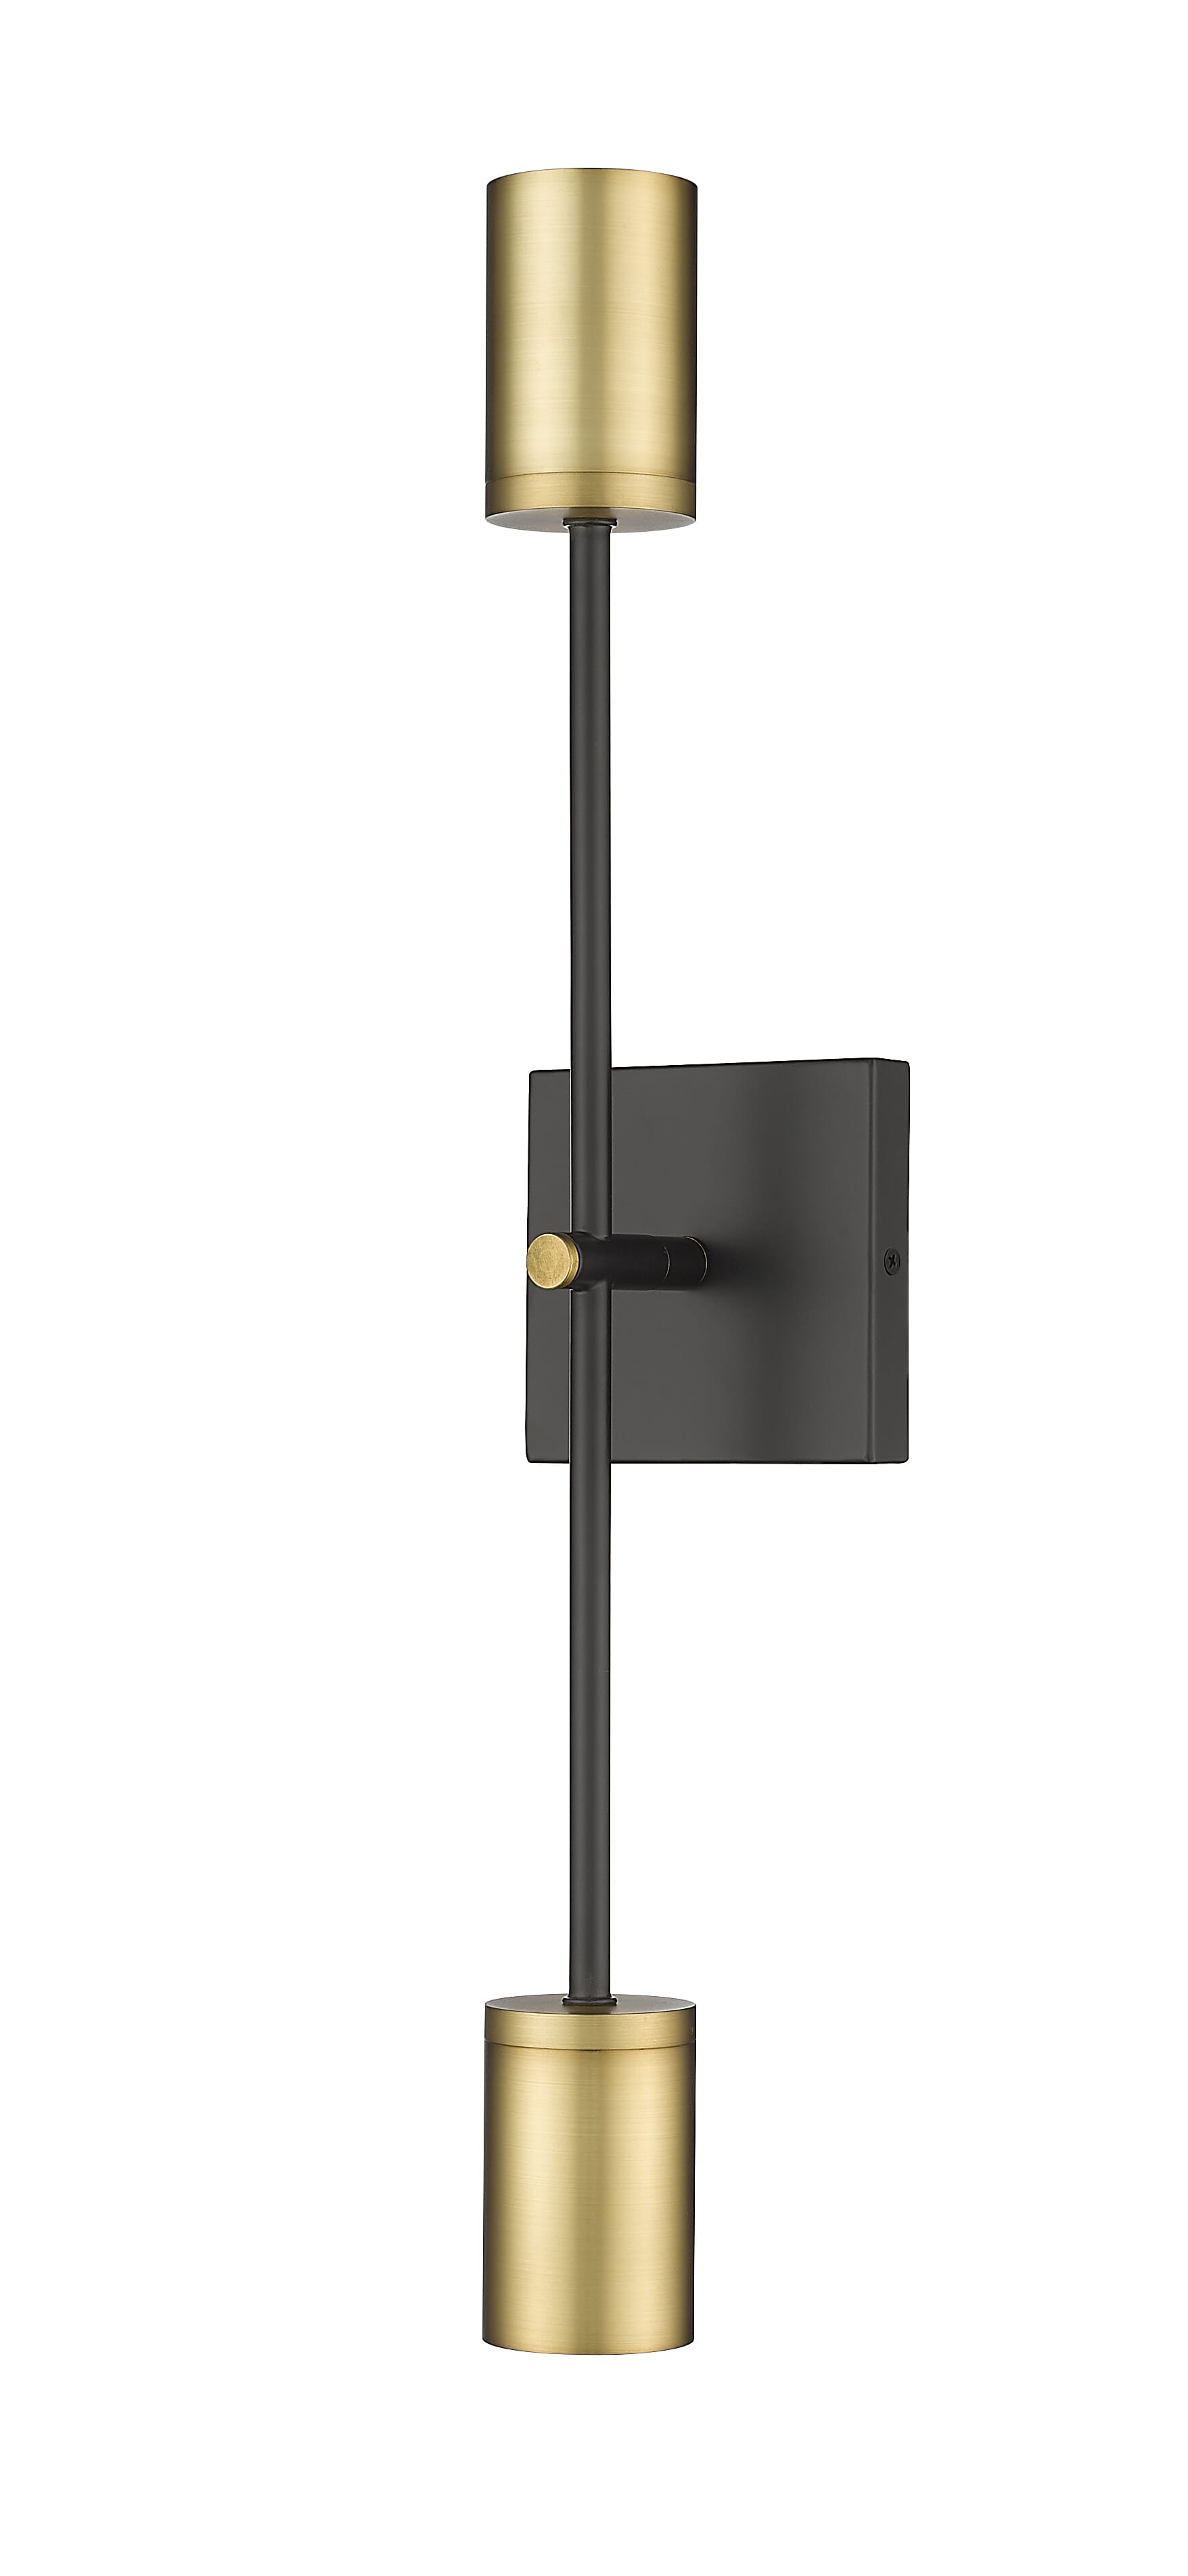 Calumet 2-Light Wall Sconce In Matte Black With Olde Brass